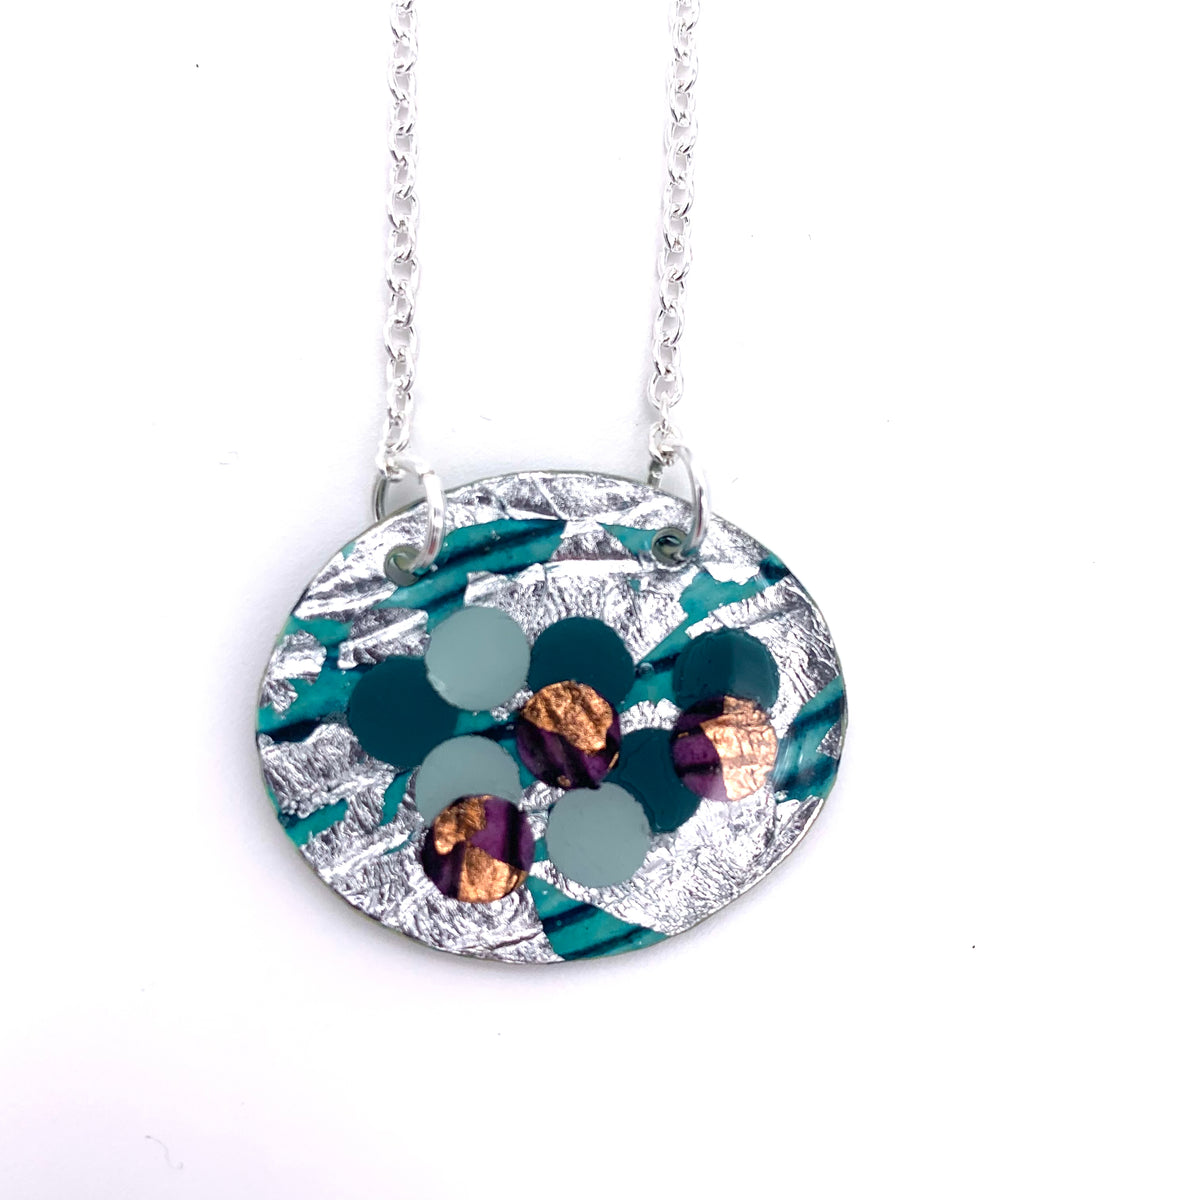 Pebble sgraffito textile necklace in sea-blue/silver with dot details